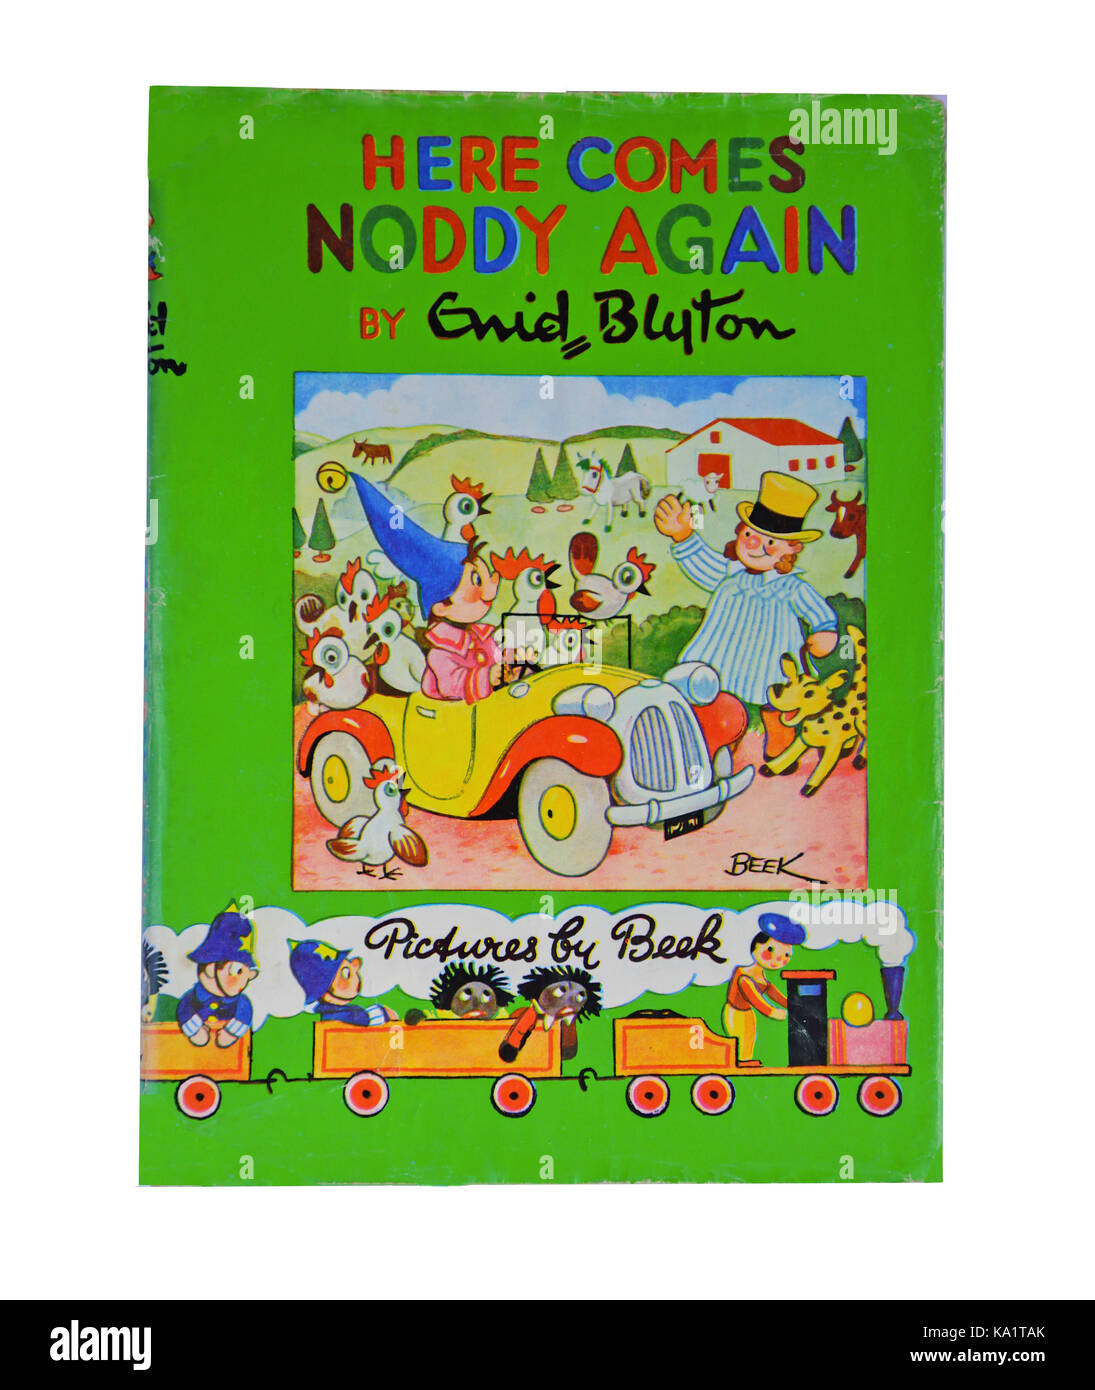 Enid Blyton's 'Here comes Noddy Again' Noddy book, Ascot, Berkshire, Angleterre, Royaume-Uni Banque D'Images